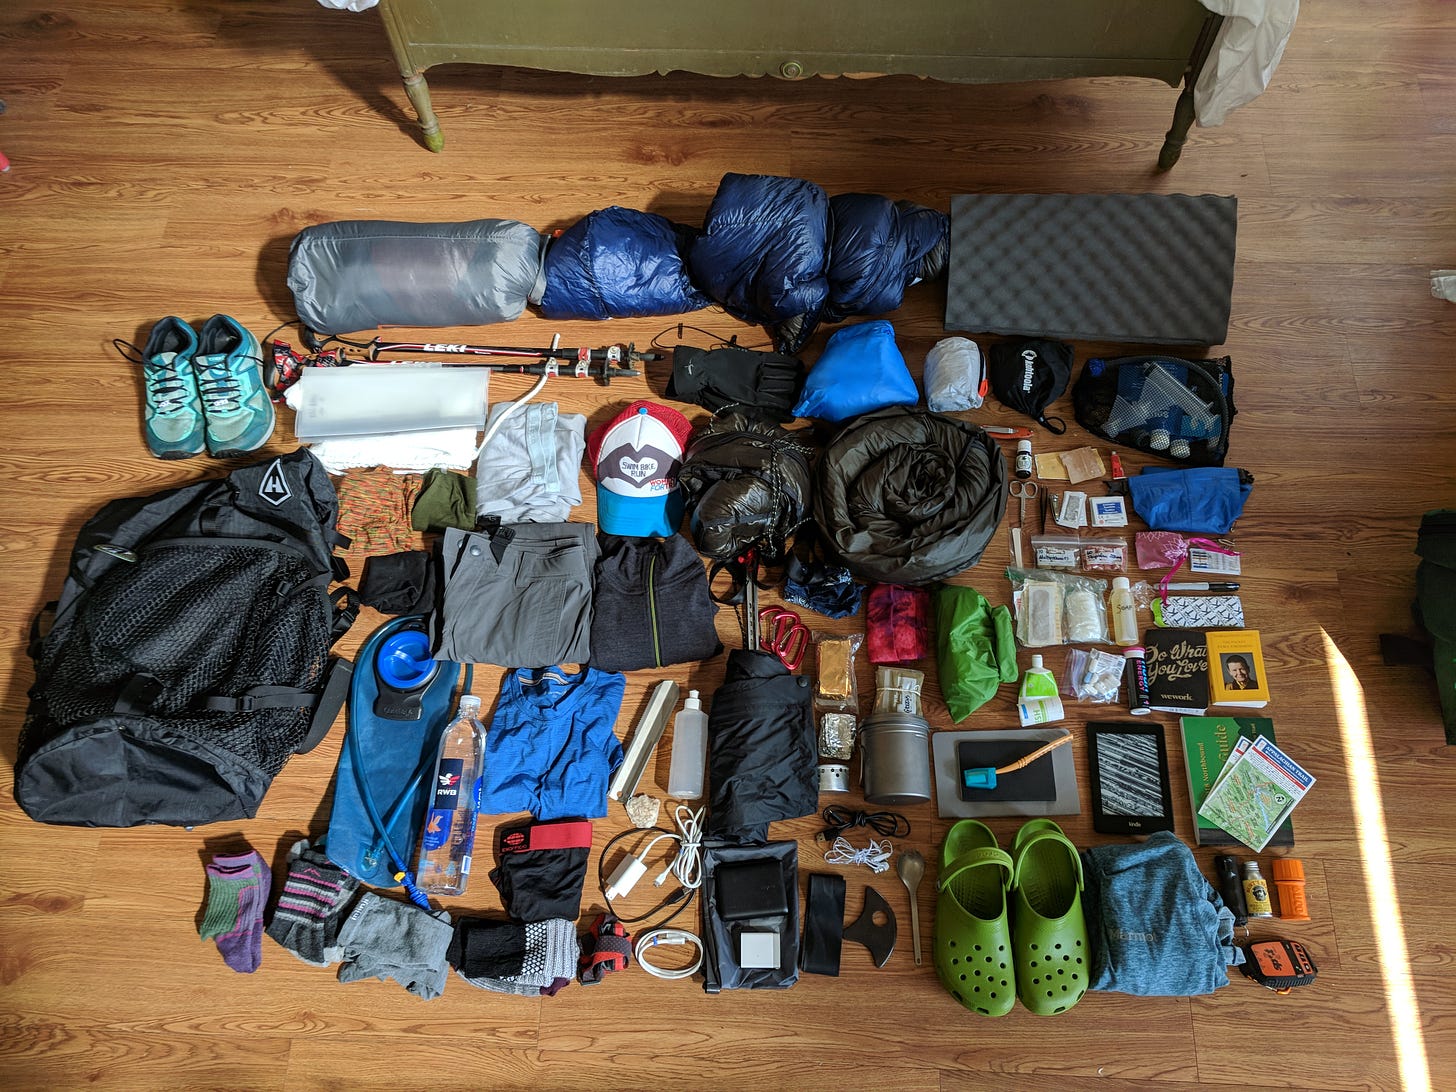 A photo of Sassafras' entire thru-hiking gear laid out on the floor the day before she left.